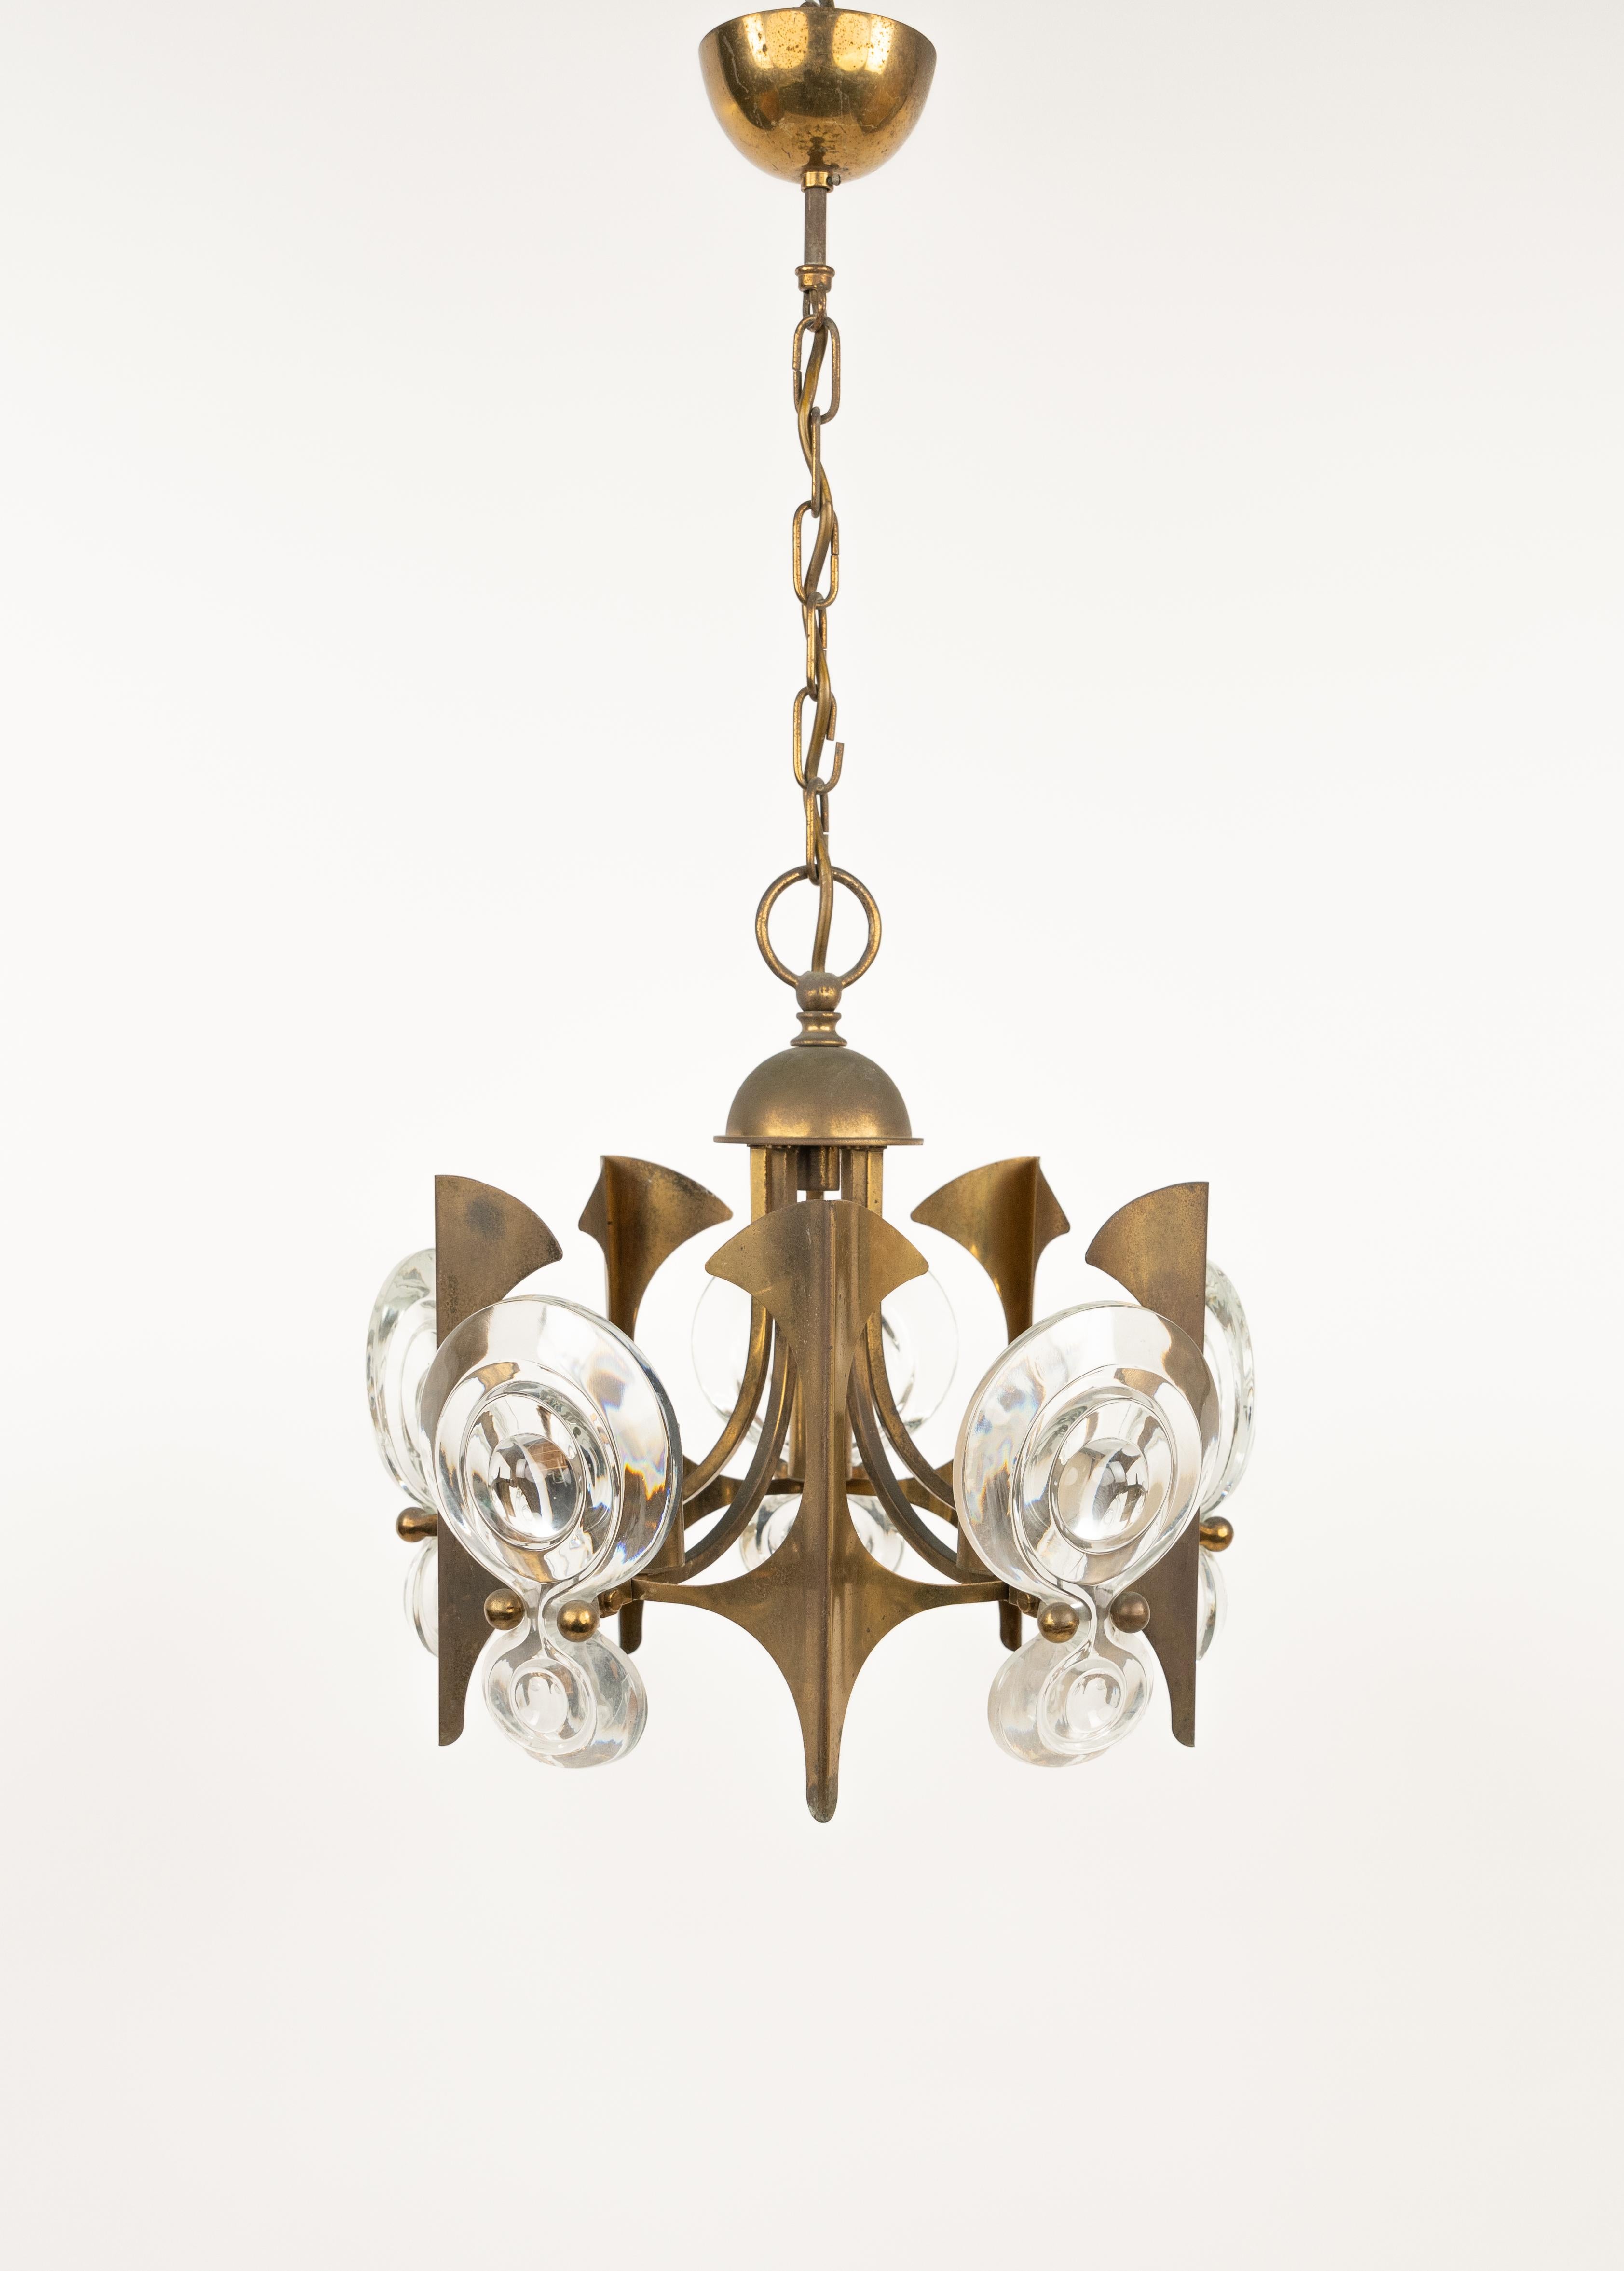 Midcentury Chandelier Brass and Glass by Oscar Torlasco, Italy 1960s For Sale 4